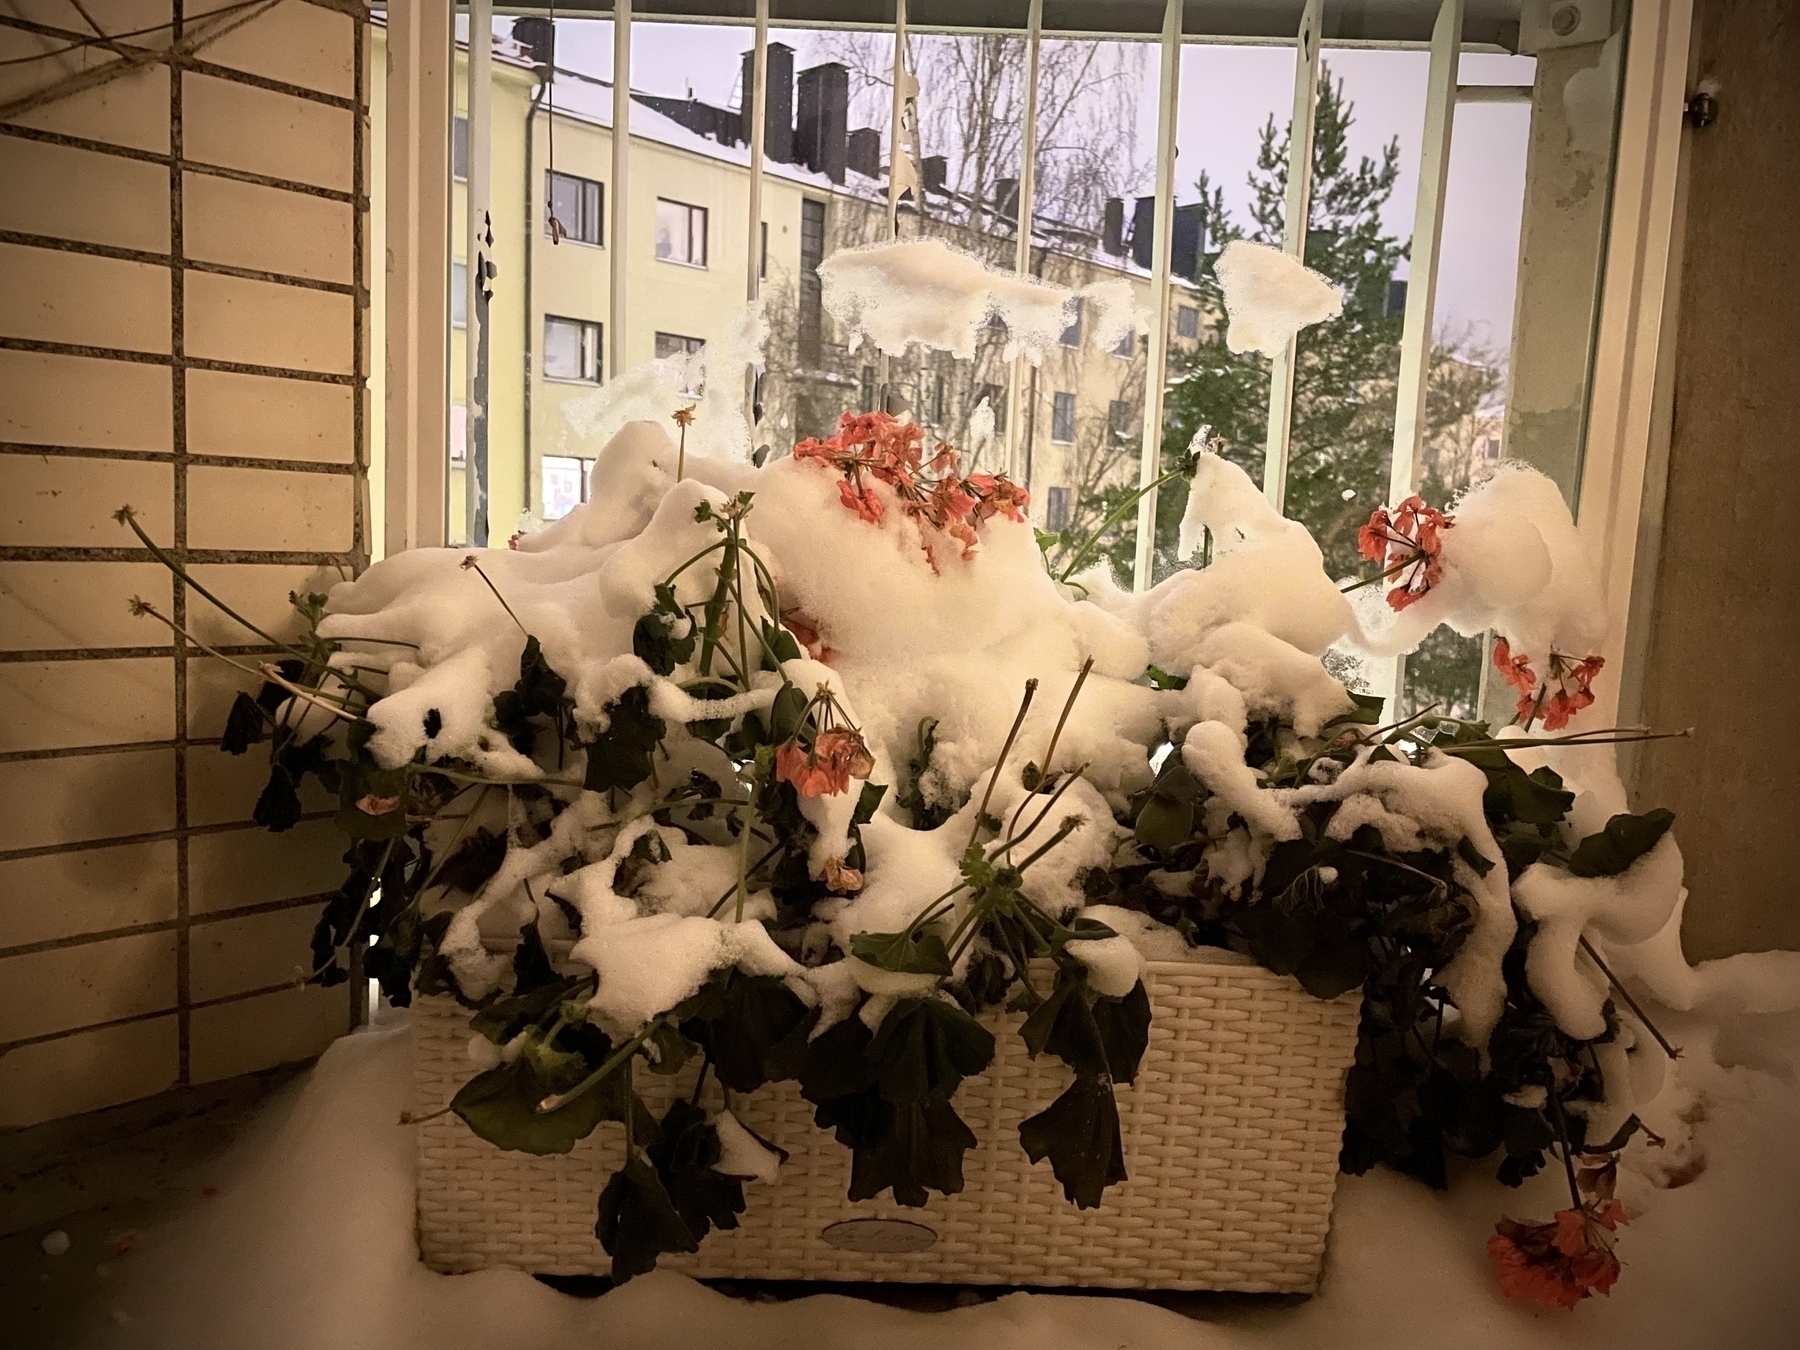 Snow-covered flowers. In the background you can see residential buildings and a tree